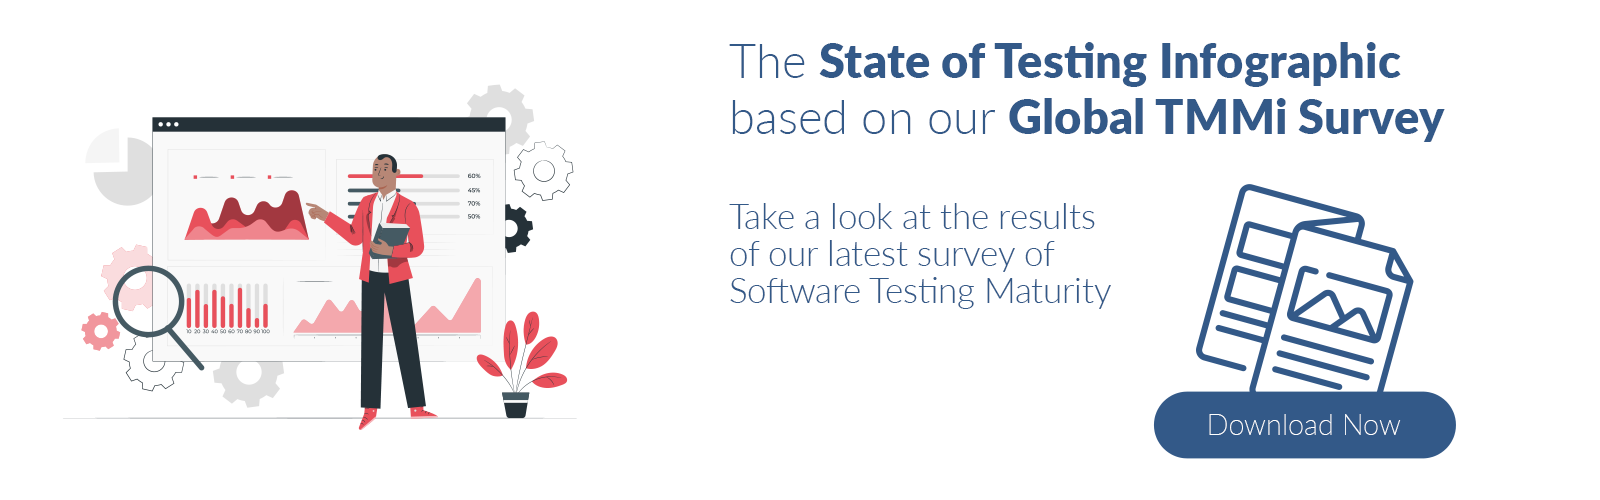 Download our State of Testing Infographic